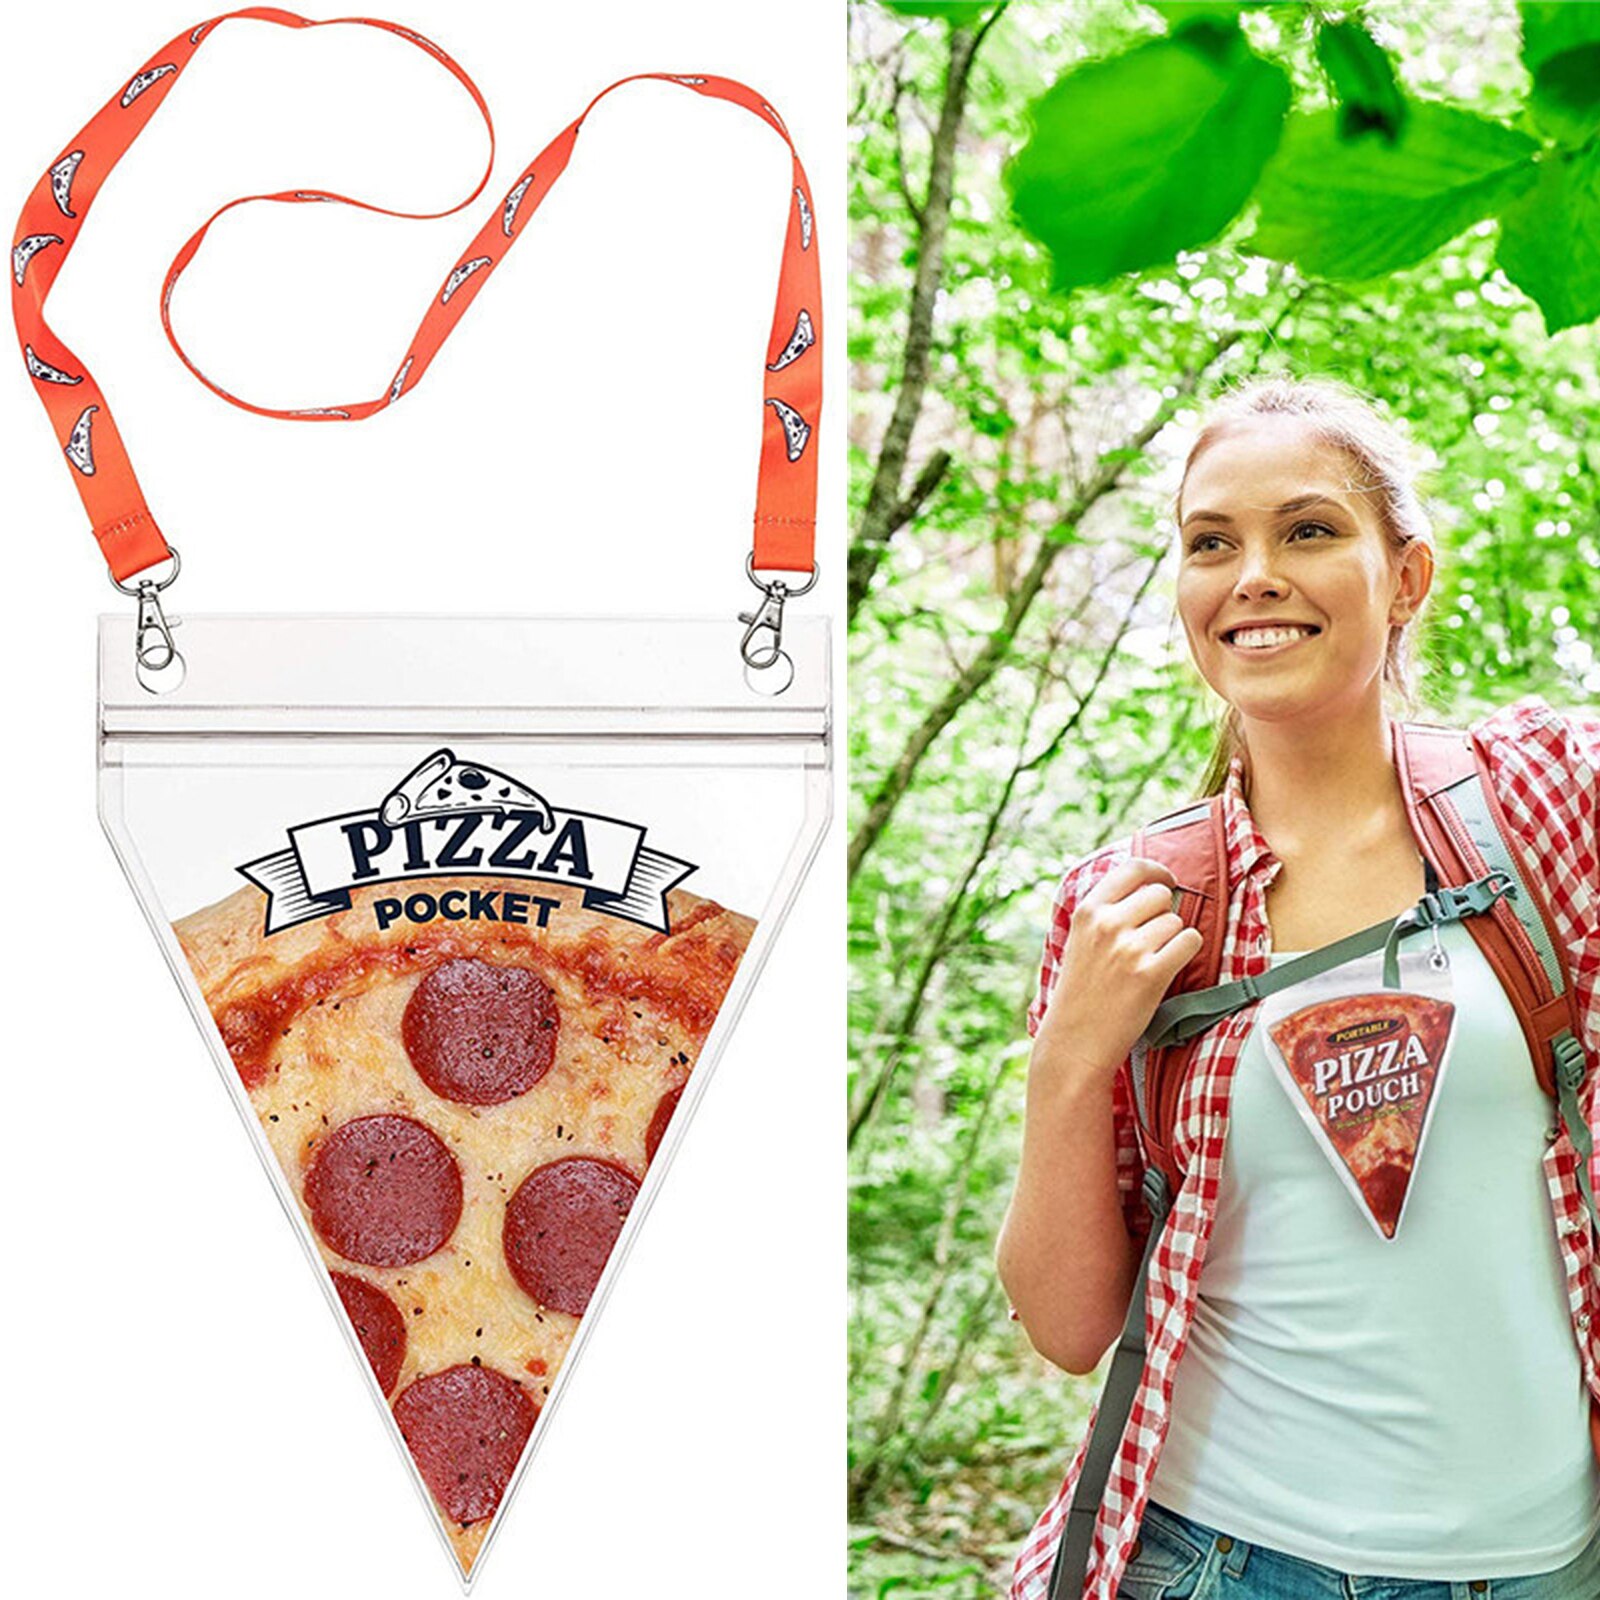 Transparante Zak \ Voedsel Pizza Pocket Grote Propgift Pizza Tas Opbergtas Grappig Draagbare Grote Propgift Draagbare Pizza tas